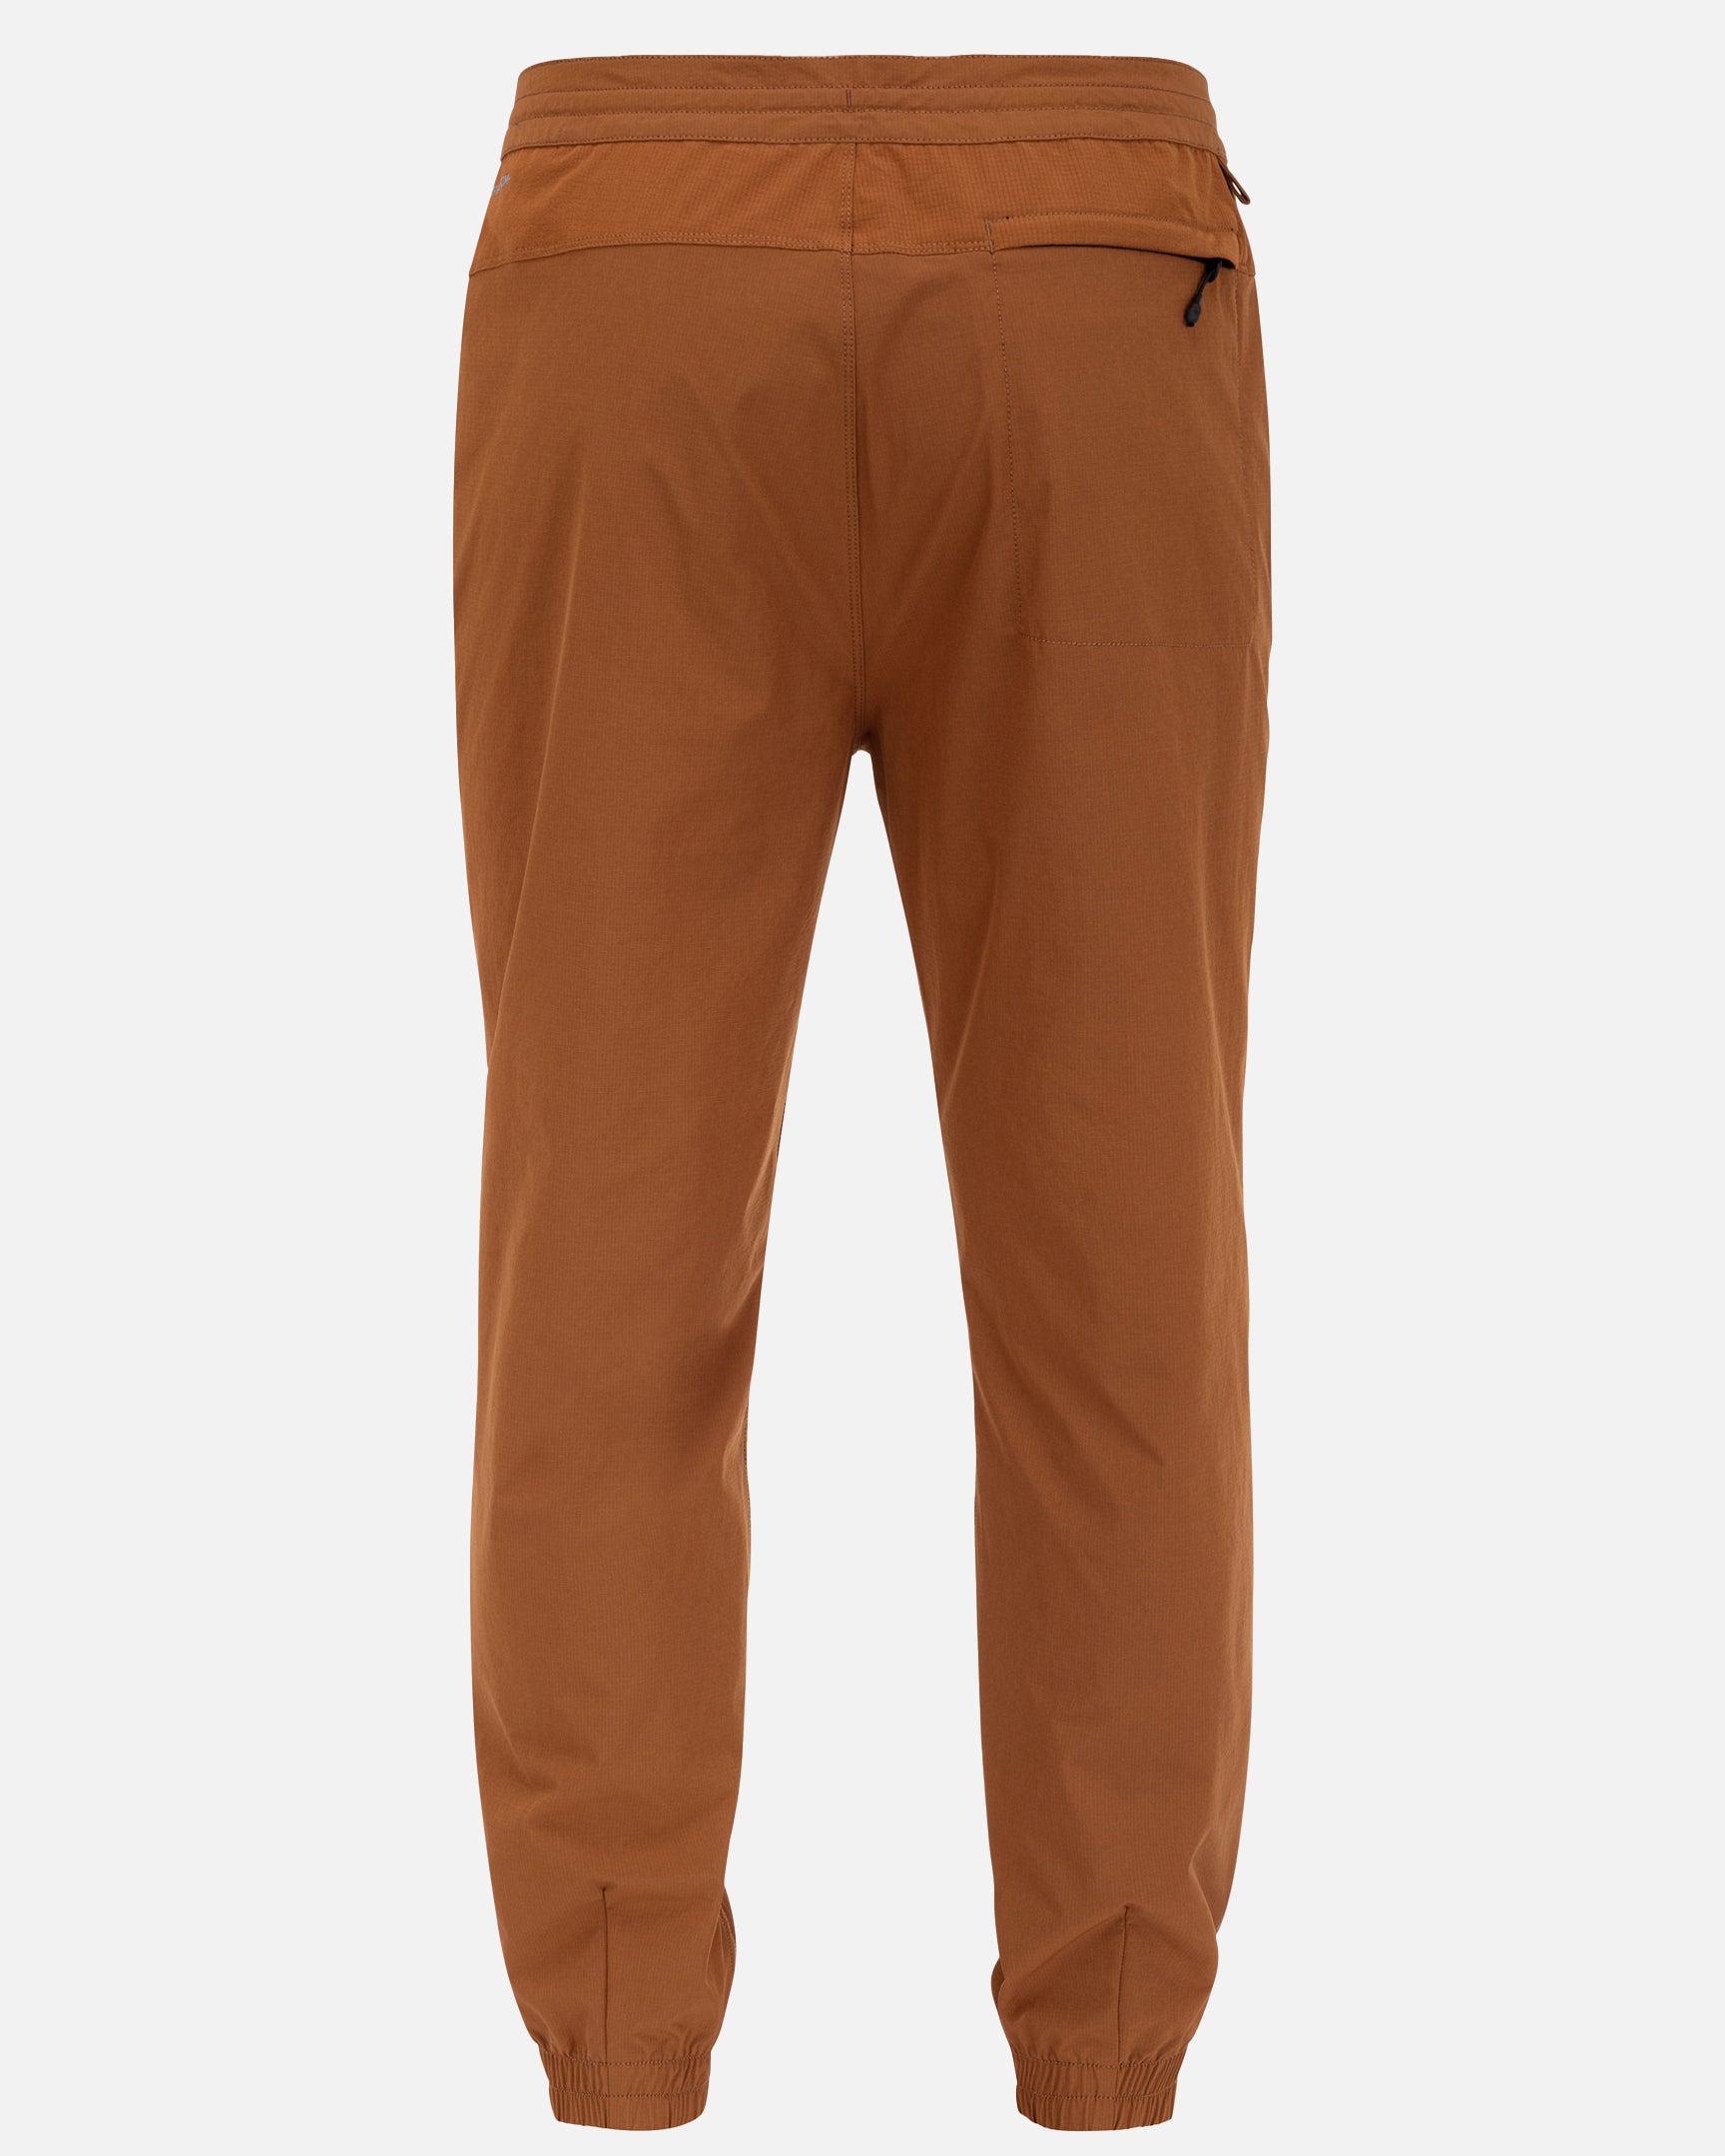 Departwest Twill Jogger Stretch Pant - Men's Pants in Tan